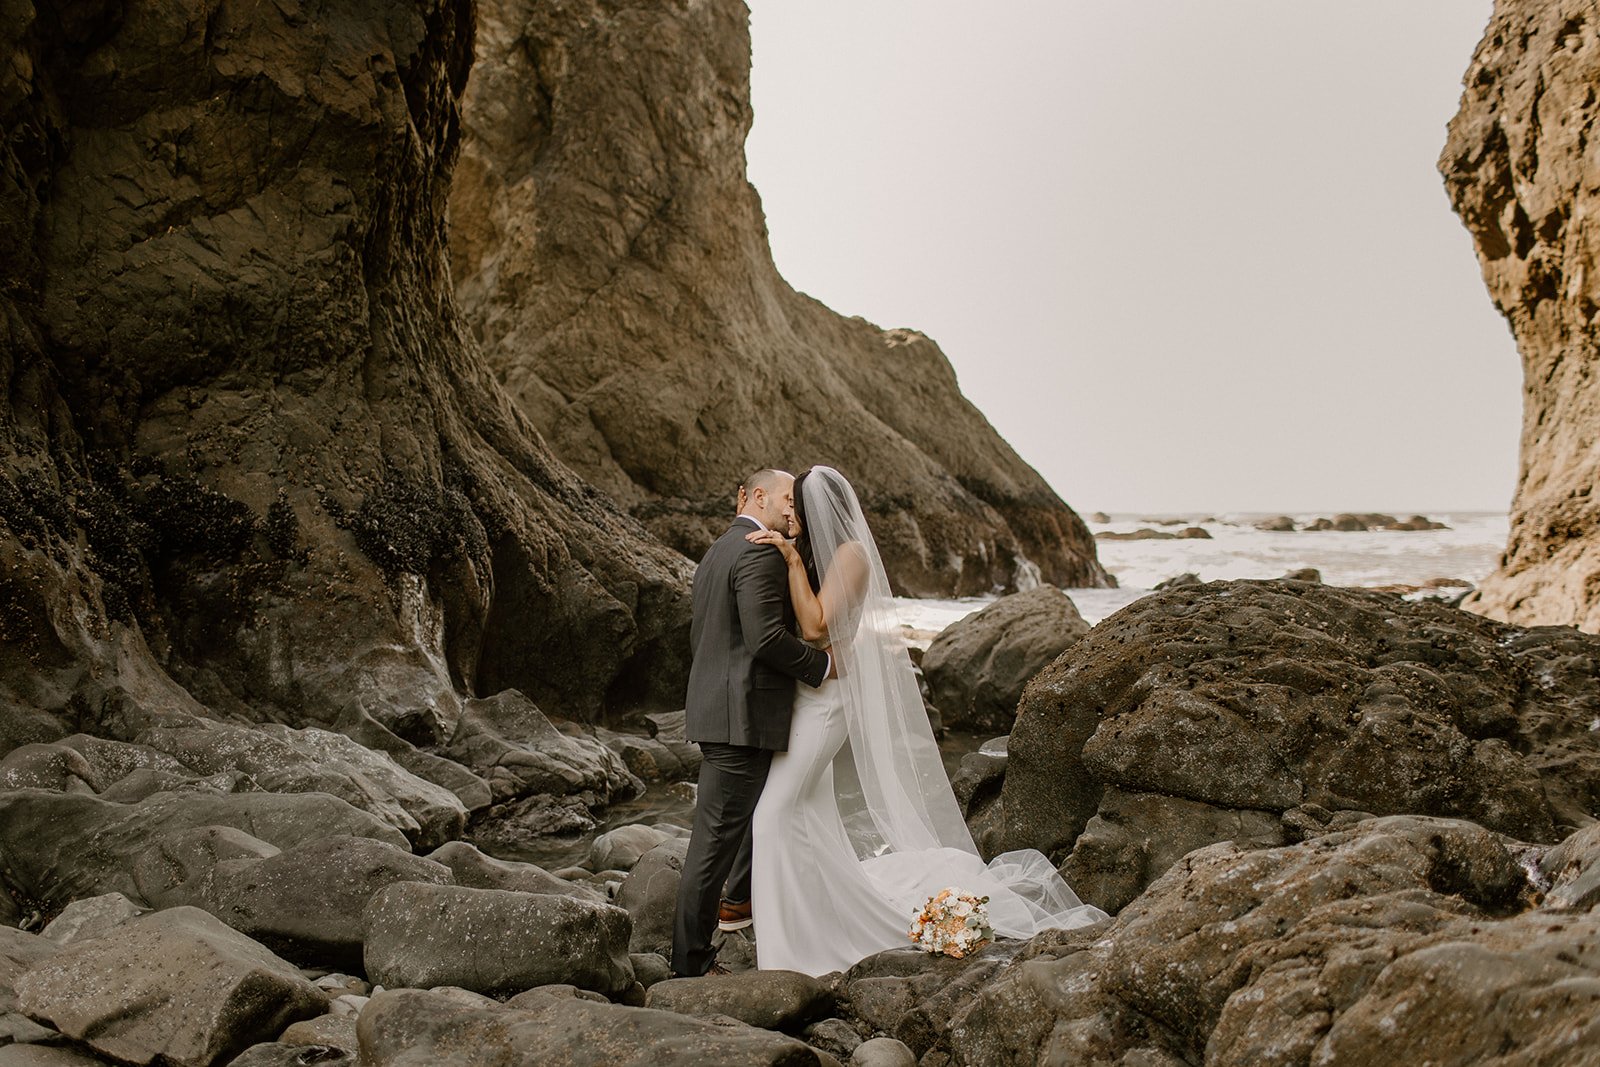 Bride and groom hugging on rocks and in front of cliffs on ruby beach in washington state